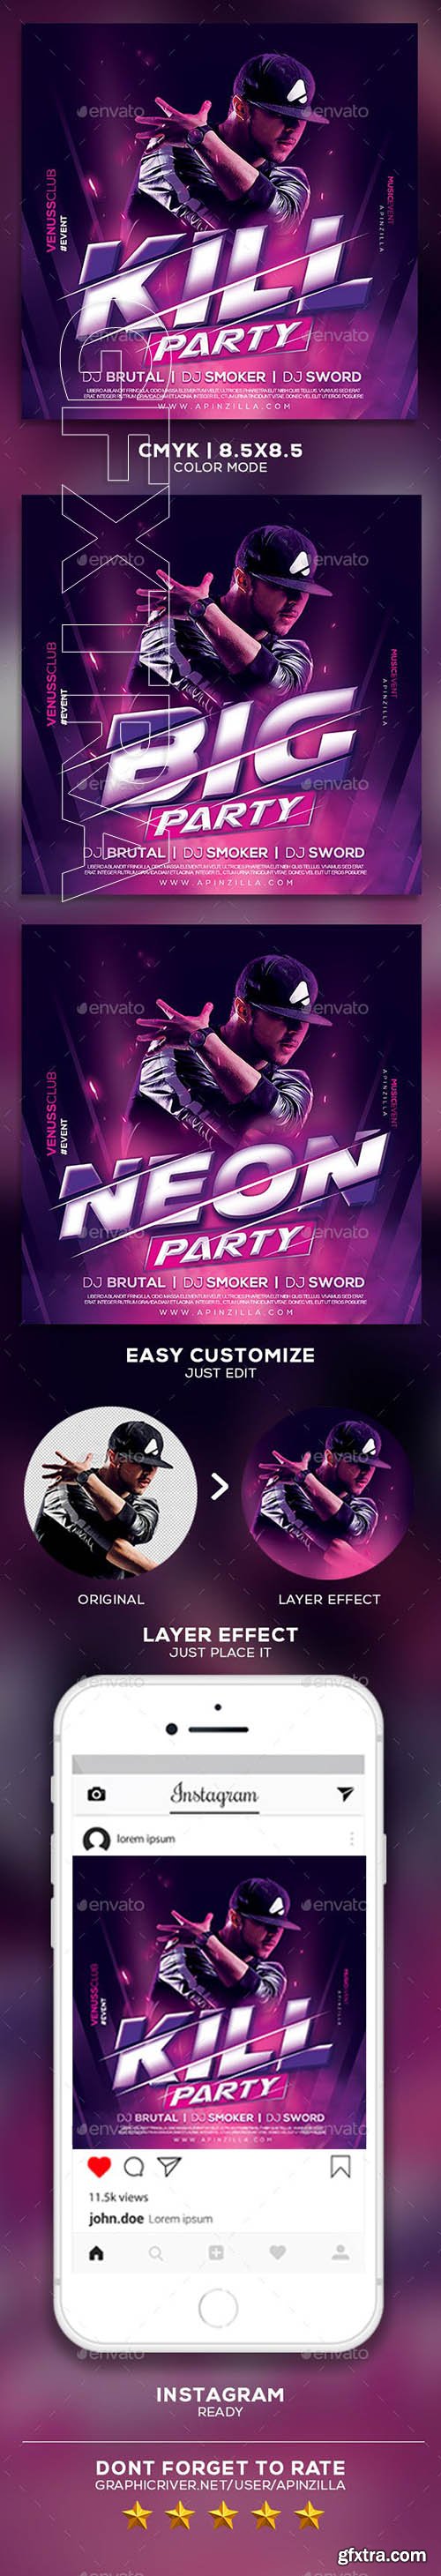 GraphicRiver - DJ Music Party Flyer 23649742